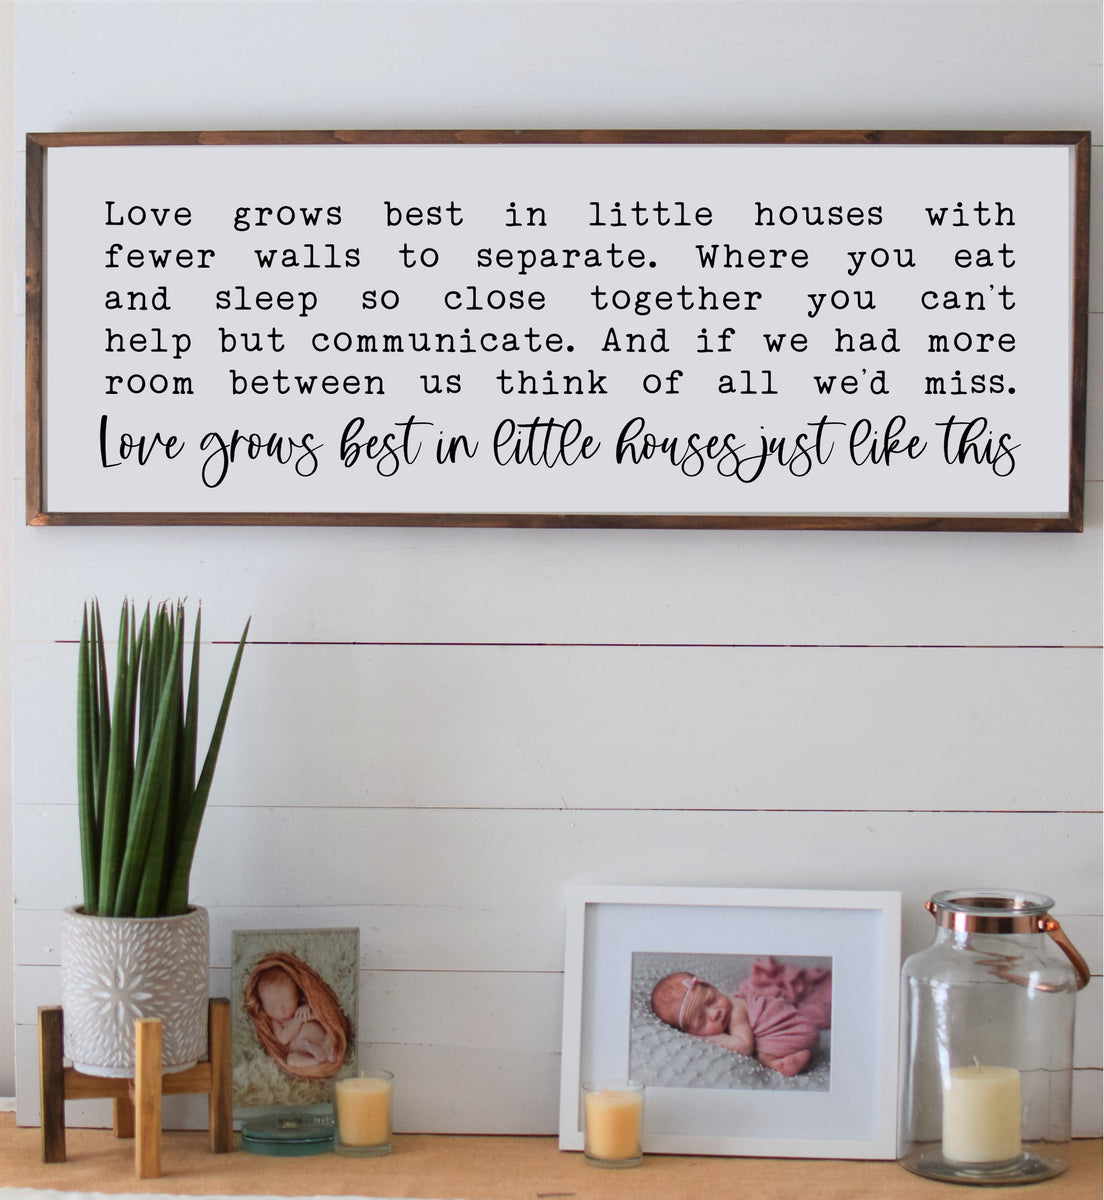 Love Grows Best in little Houses just like this – Magnolia Signs